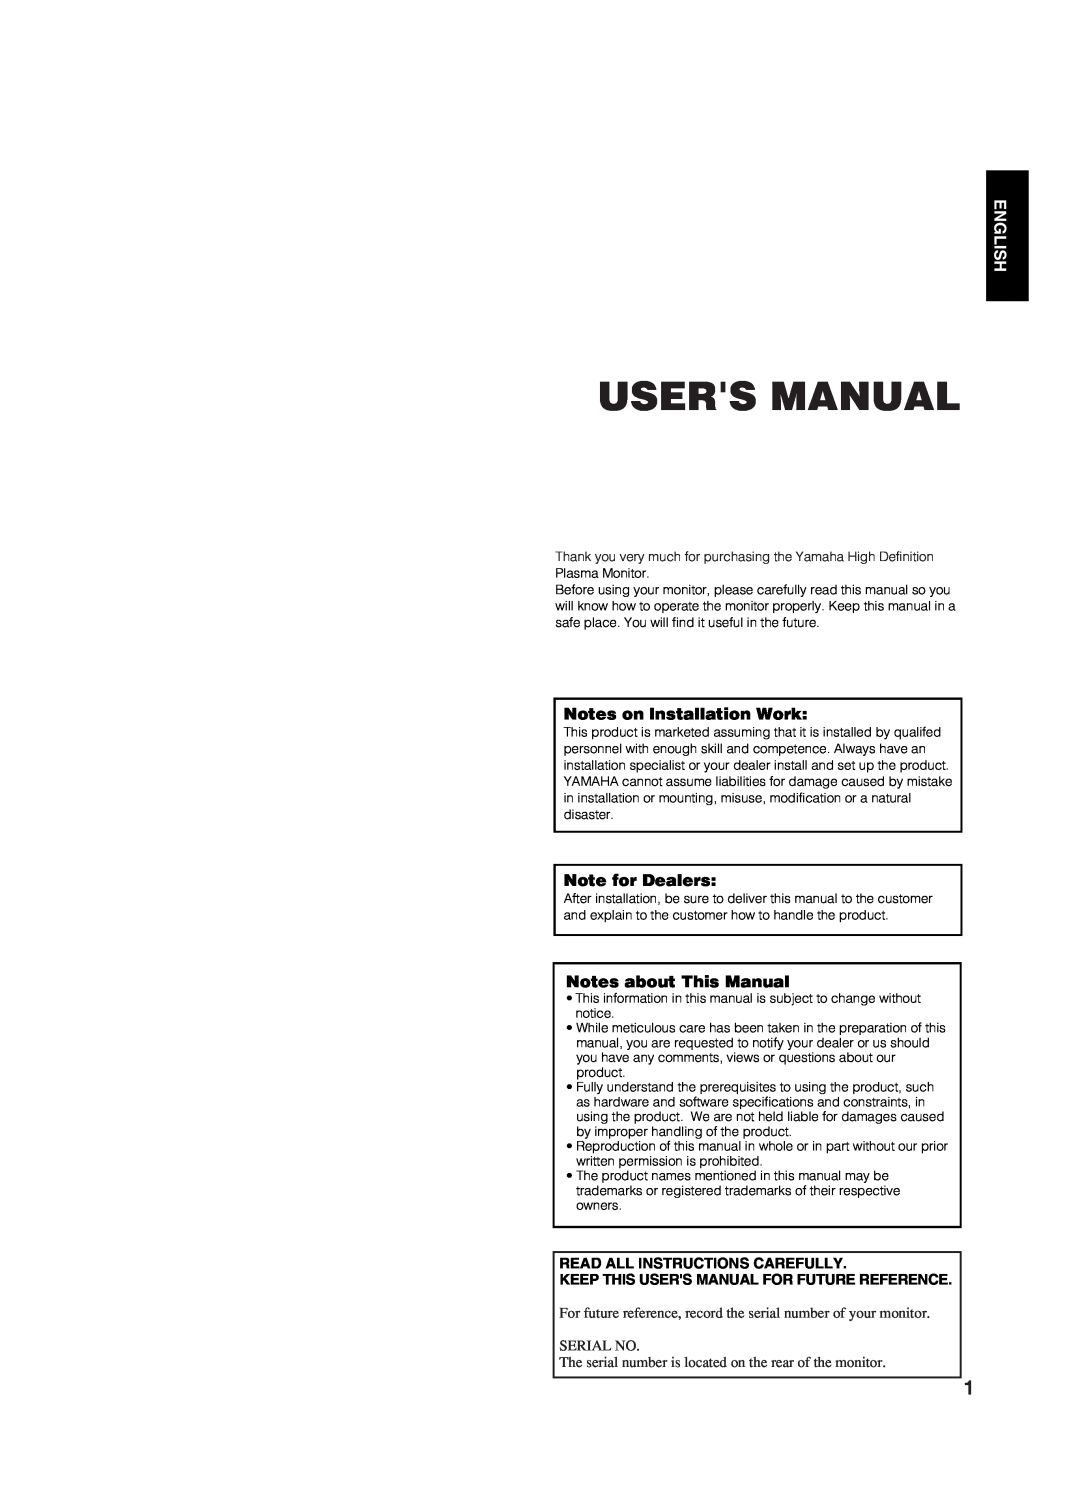 Yamaha PDM-4210E user manual Users Manual, English, Notes on lnstallation Work, Note for Dealers, Notes about This Manual 